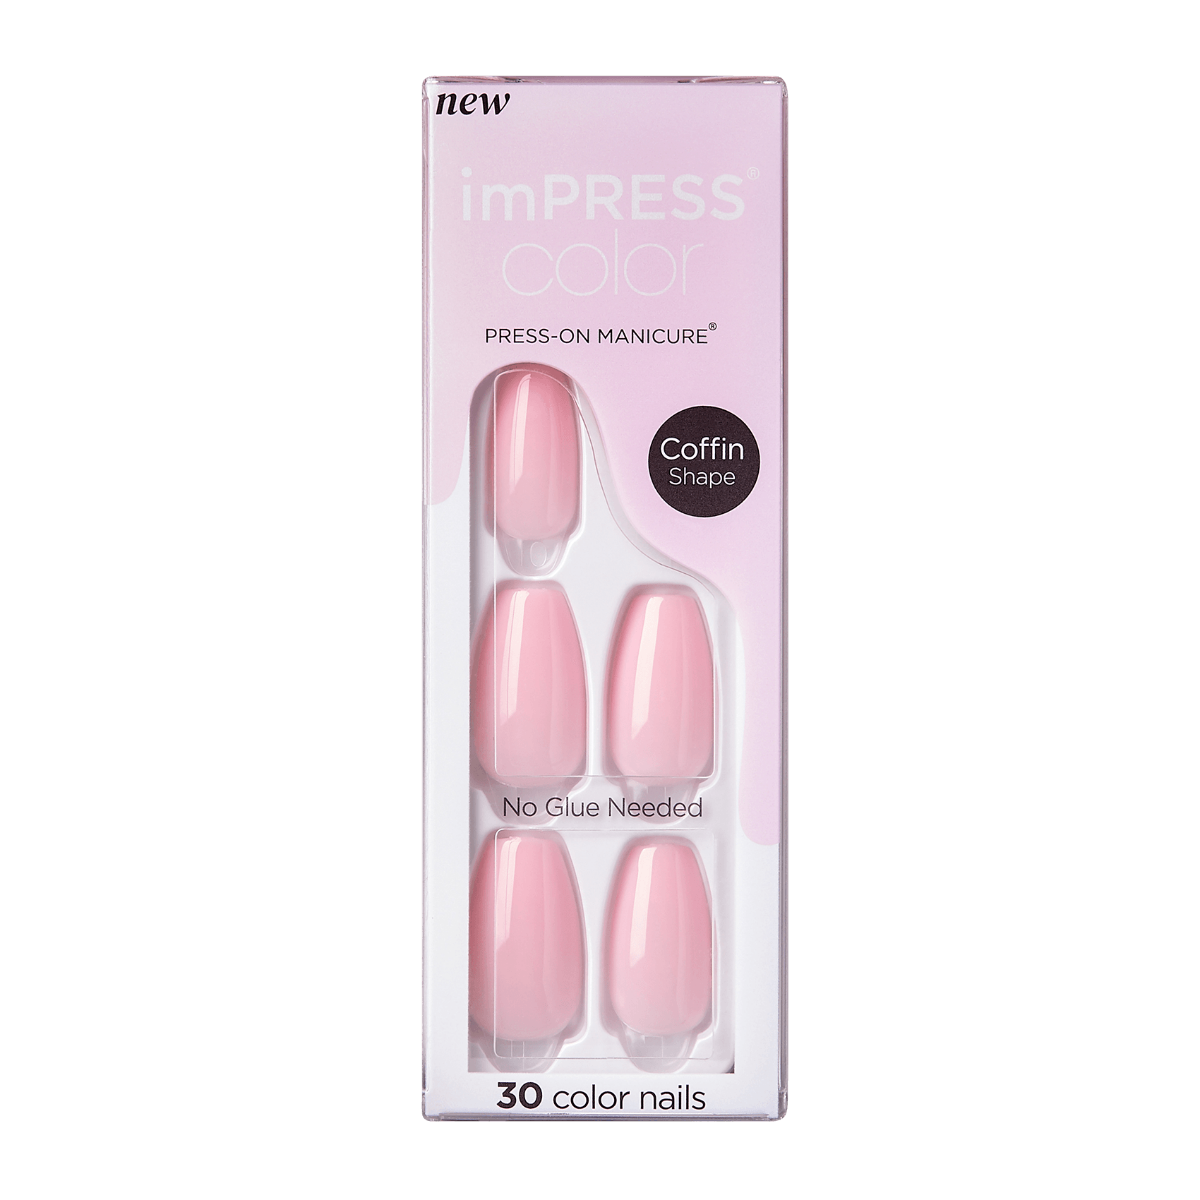 KISS ImPRESS Color Press-On Manicure - Pink Dream - Taille M